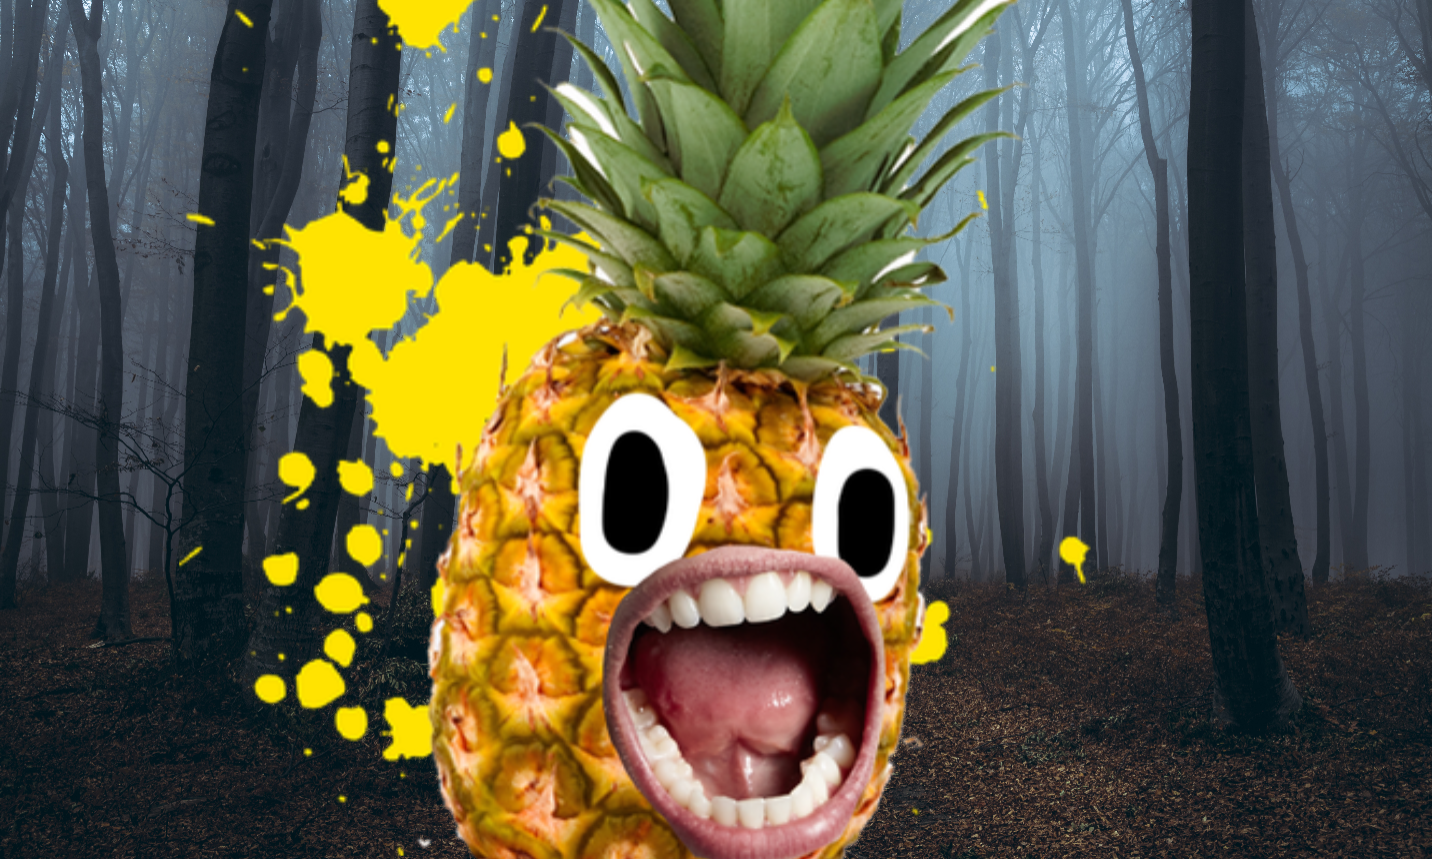 A pineapple in a wood